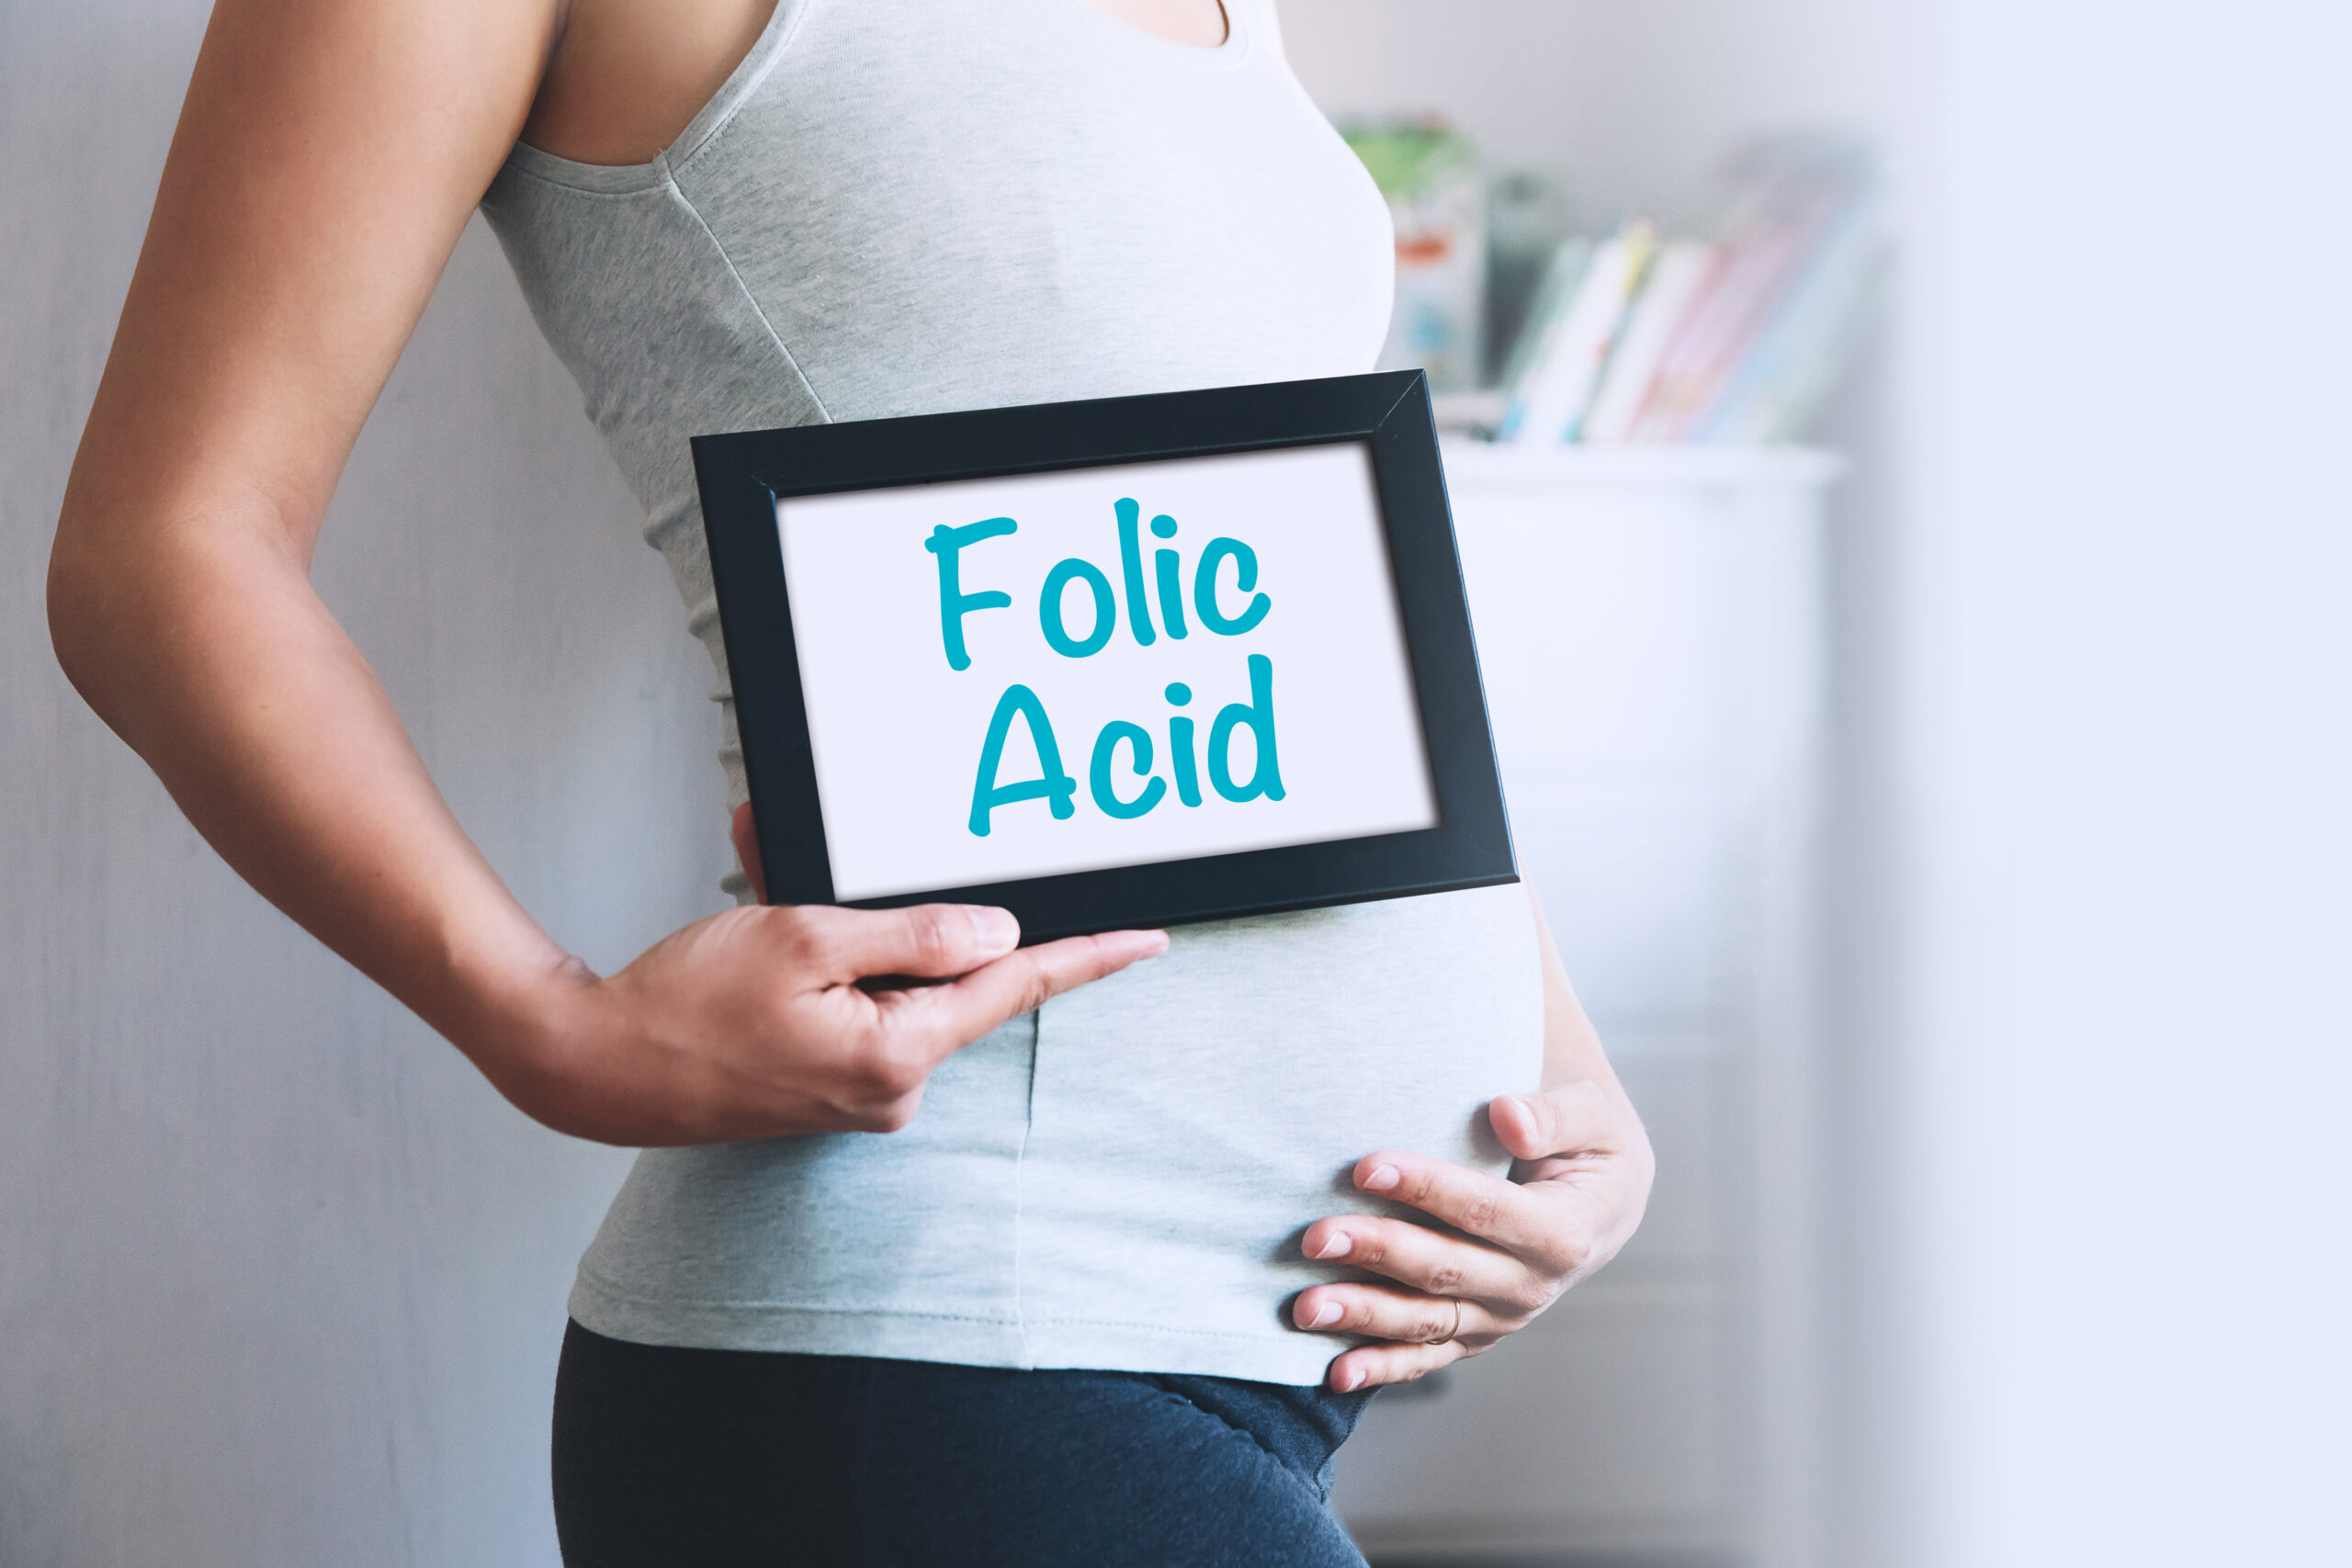 A pregnant woman holds a whiteboard, on which is written: folic acid.